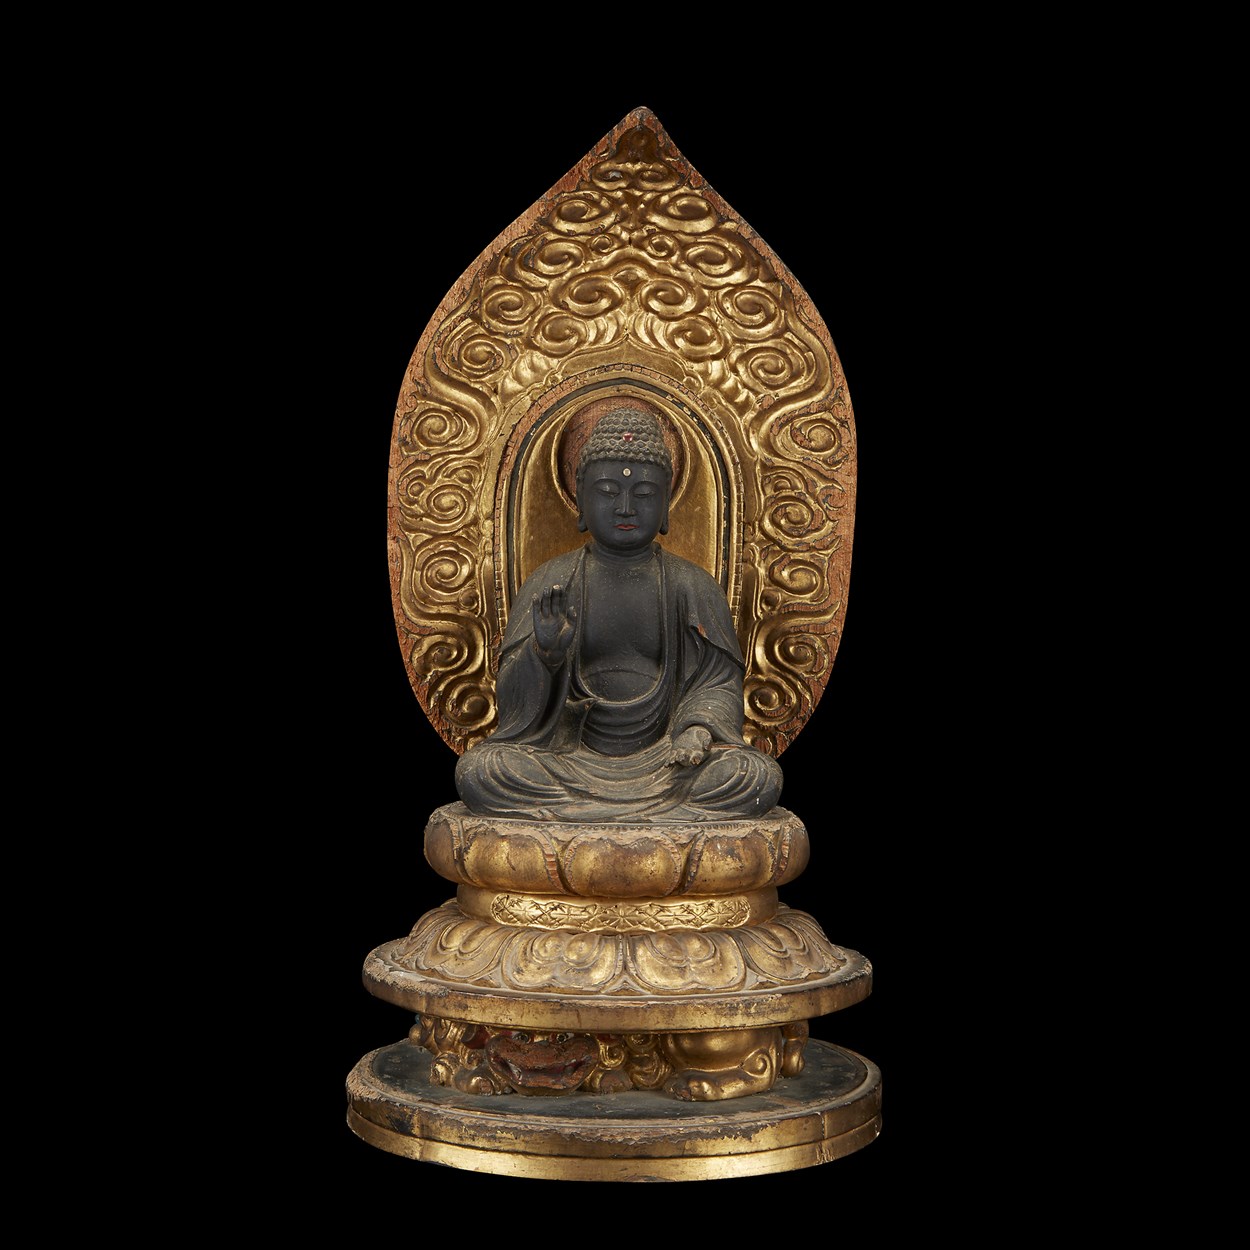 Lot 38 - A Japanese carved wood and gilt lacquered figure of Amida Buddha seated